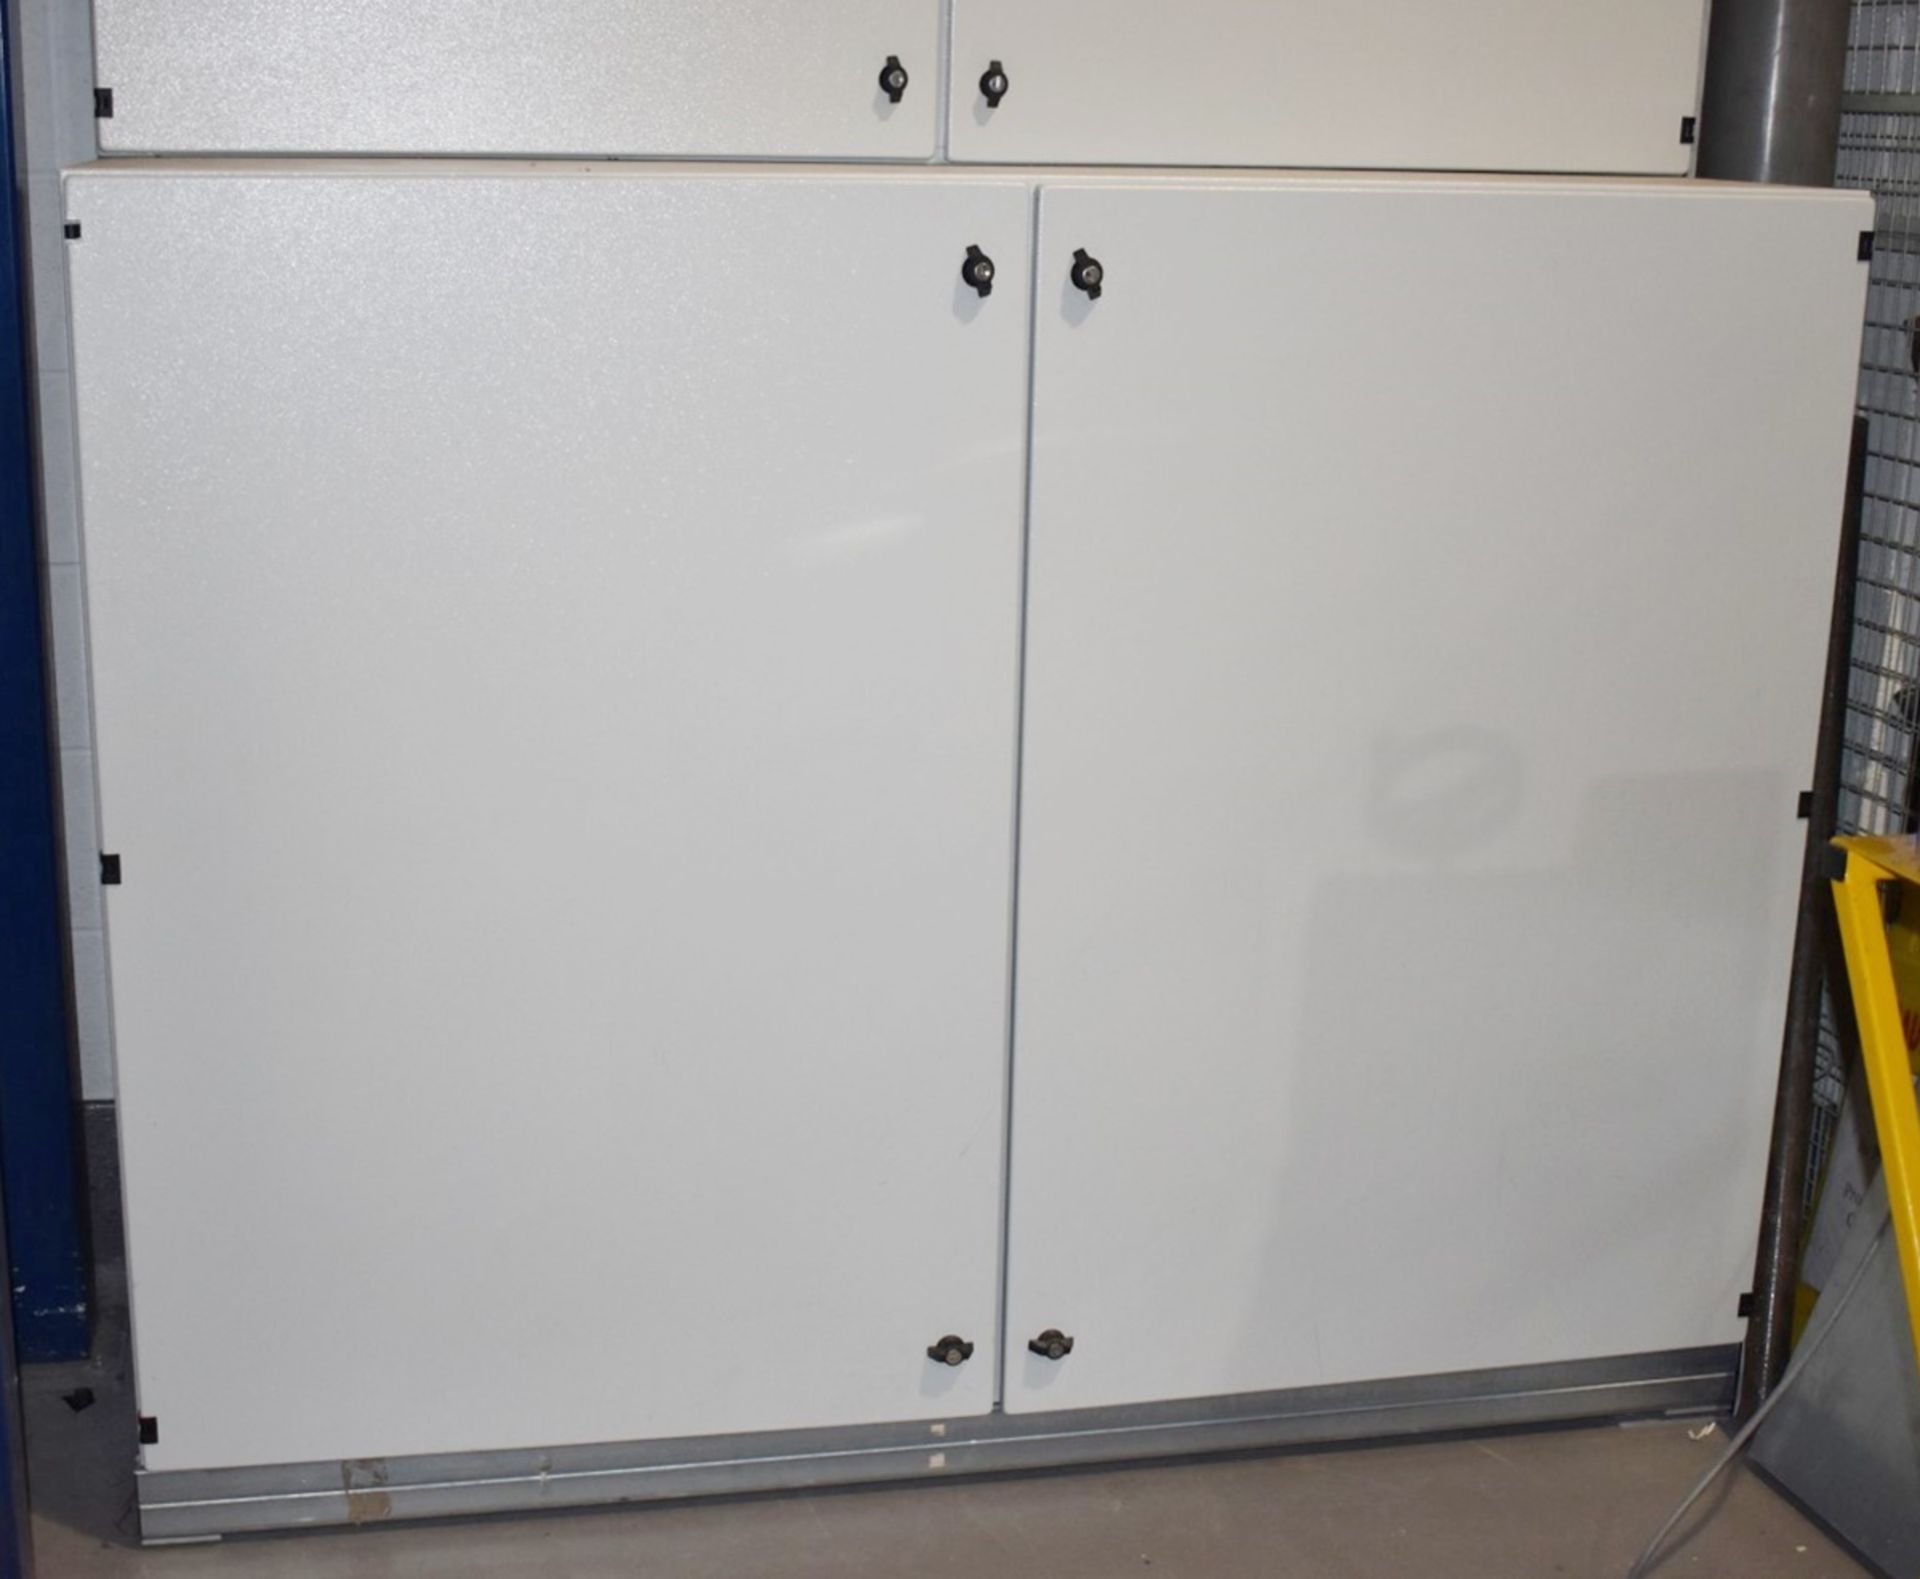 1 x Large Workshop Storage Cabinet Grey Coated Metal Cabinet With Locks and Internal Shelves - Image 6 of 6